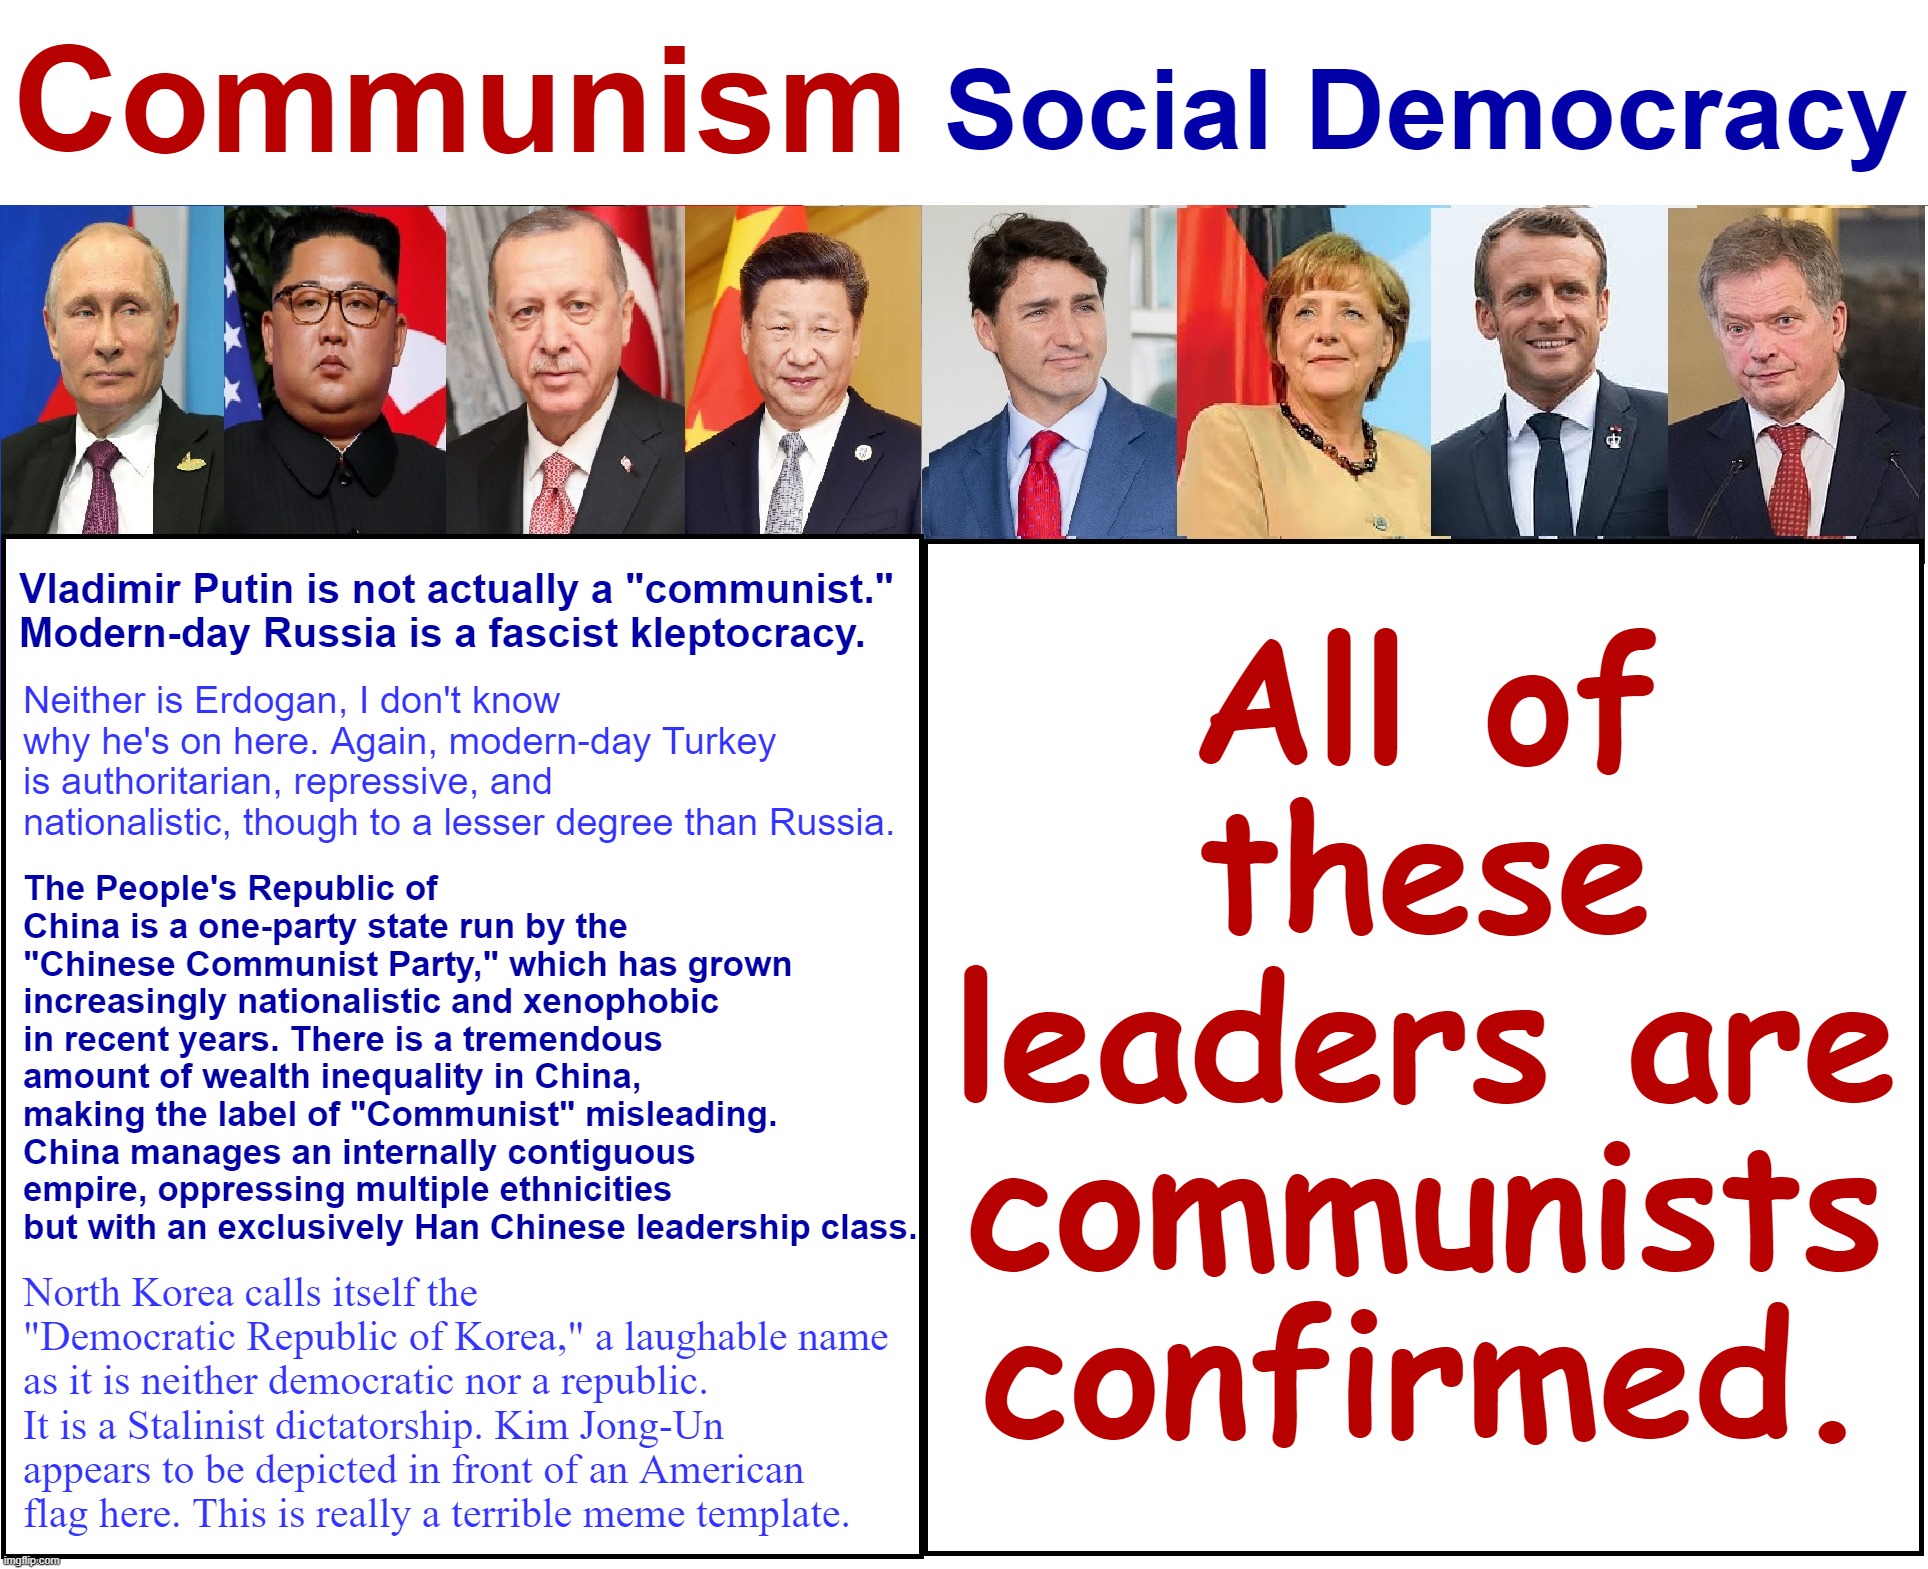 based, maga | Communism; Social Democracy; All of these leaders are communists confirmed. Vladimir Putin is not actually a "communist." Modern-day Russia is a fascist kleptocracy. Neither is Erdogan, I don't know why he's on here. Again, modern-day Turkey is authoritarian, repressive, and nationalistic, though to a lesser degree than Russia. The People's Republic of China is a one-party state run by the "Chinese Communist Party," which has grown increasingly nationalistic and xenophobic in recent years. There is a tremendous amount of wealth inequality in China, making the label of "Communist" misleading. China manages an internally contiguous empire, oppressing multiple ethnicities but with an exclusively Han Chinese leadership class. North Korea calls itself the "Democratic Republic of Korea," a laughable name as it is neither democratic nor a republic. It is a Stalinist dictatorship. Kim Jong-Un appears to be depicted in front of an American flag here. This is really a terrible meme template. | image tagged in communism vs social democracy,b,a,s,e,d | made w/ Imgflip meme maker